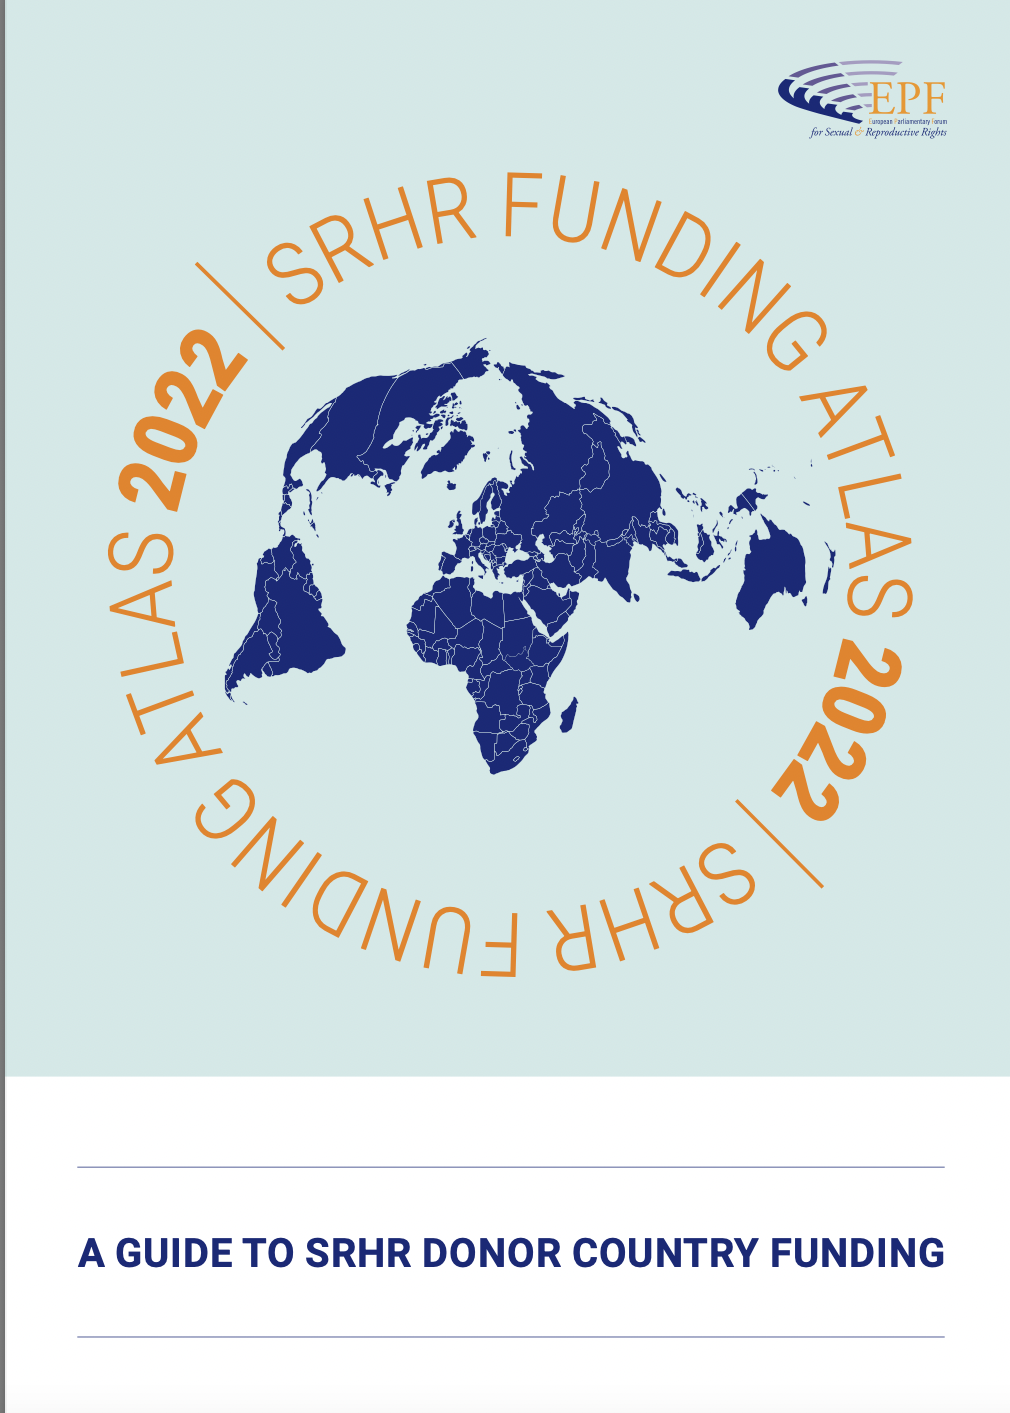 SRHR Funding Atlas 2022: A Guide to SRHR Donor Country Funding